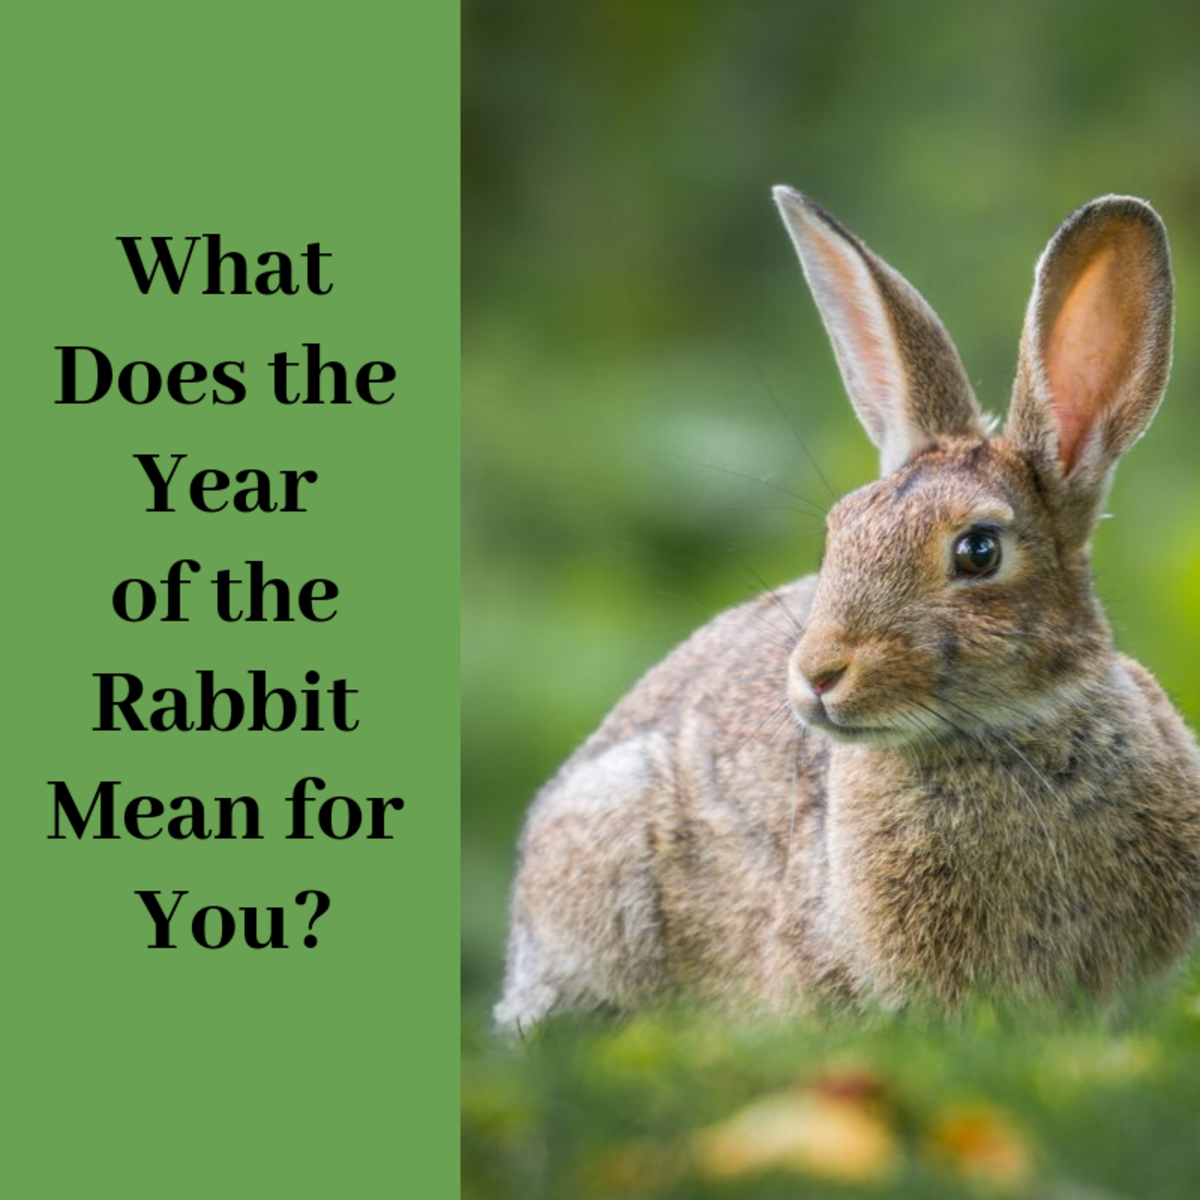 What Does the Year of the Rabbit Mean for You?